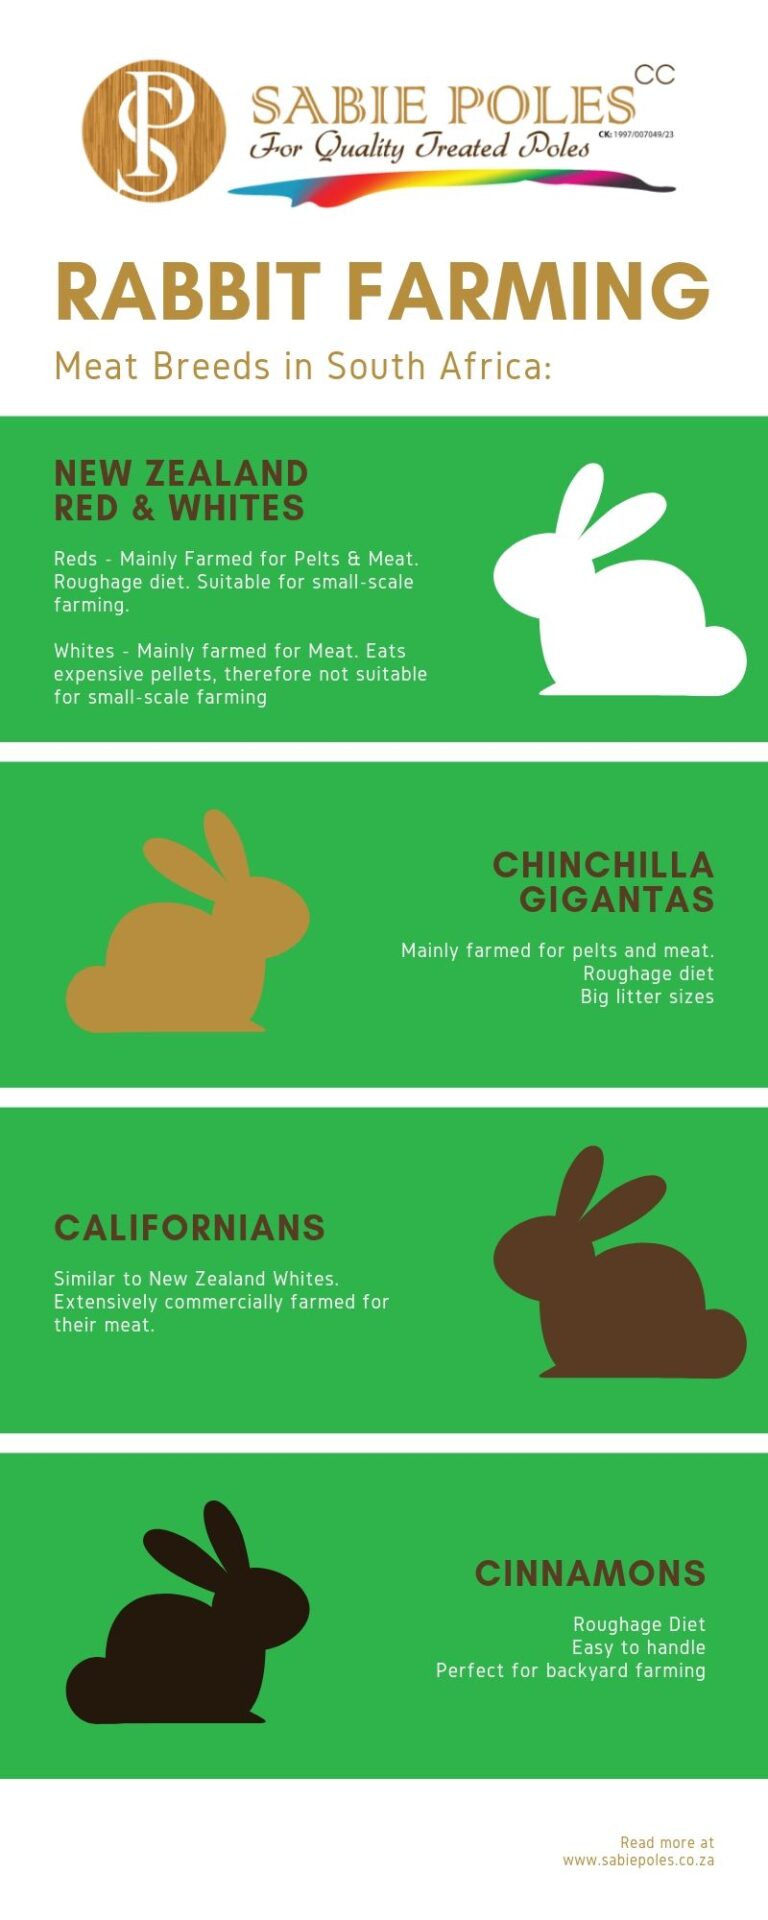 Rabbit farming meat breeds in South Africa